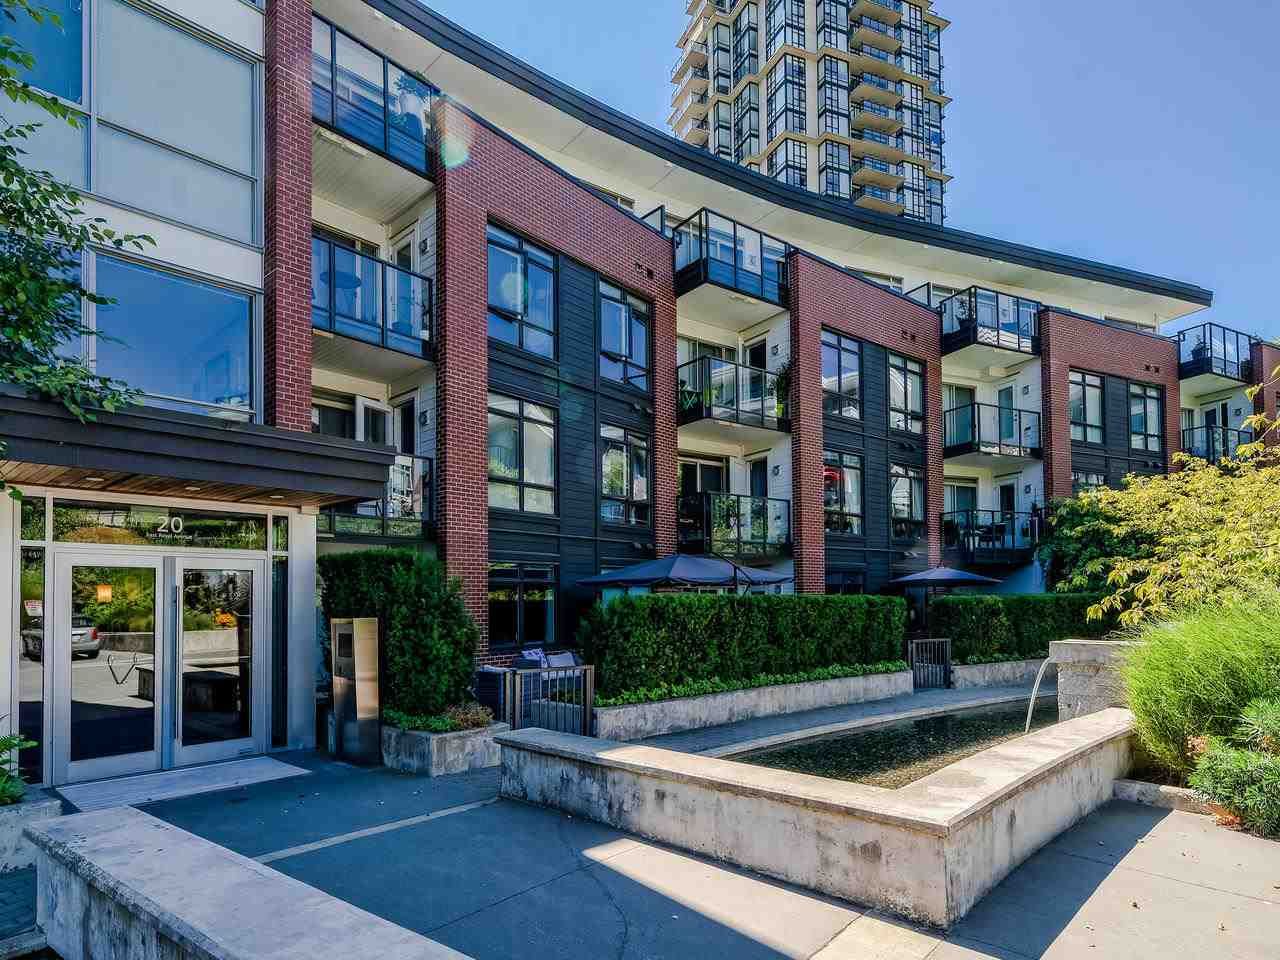 Main Photo: 108 20 E ROYAL AVENUE in New Westminster: Fraserview NW Condo for sale : MLS®# R2483013